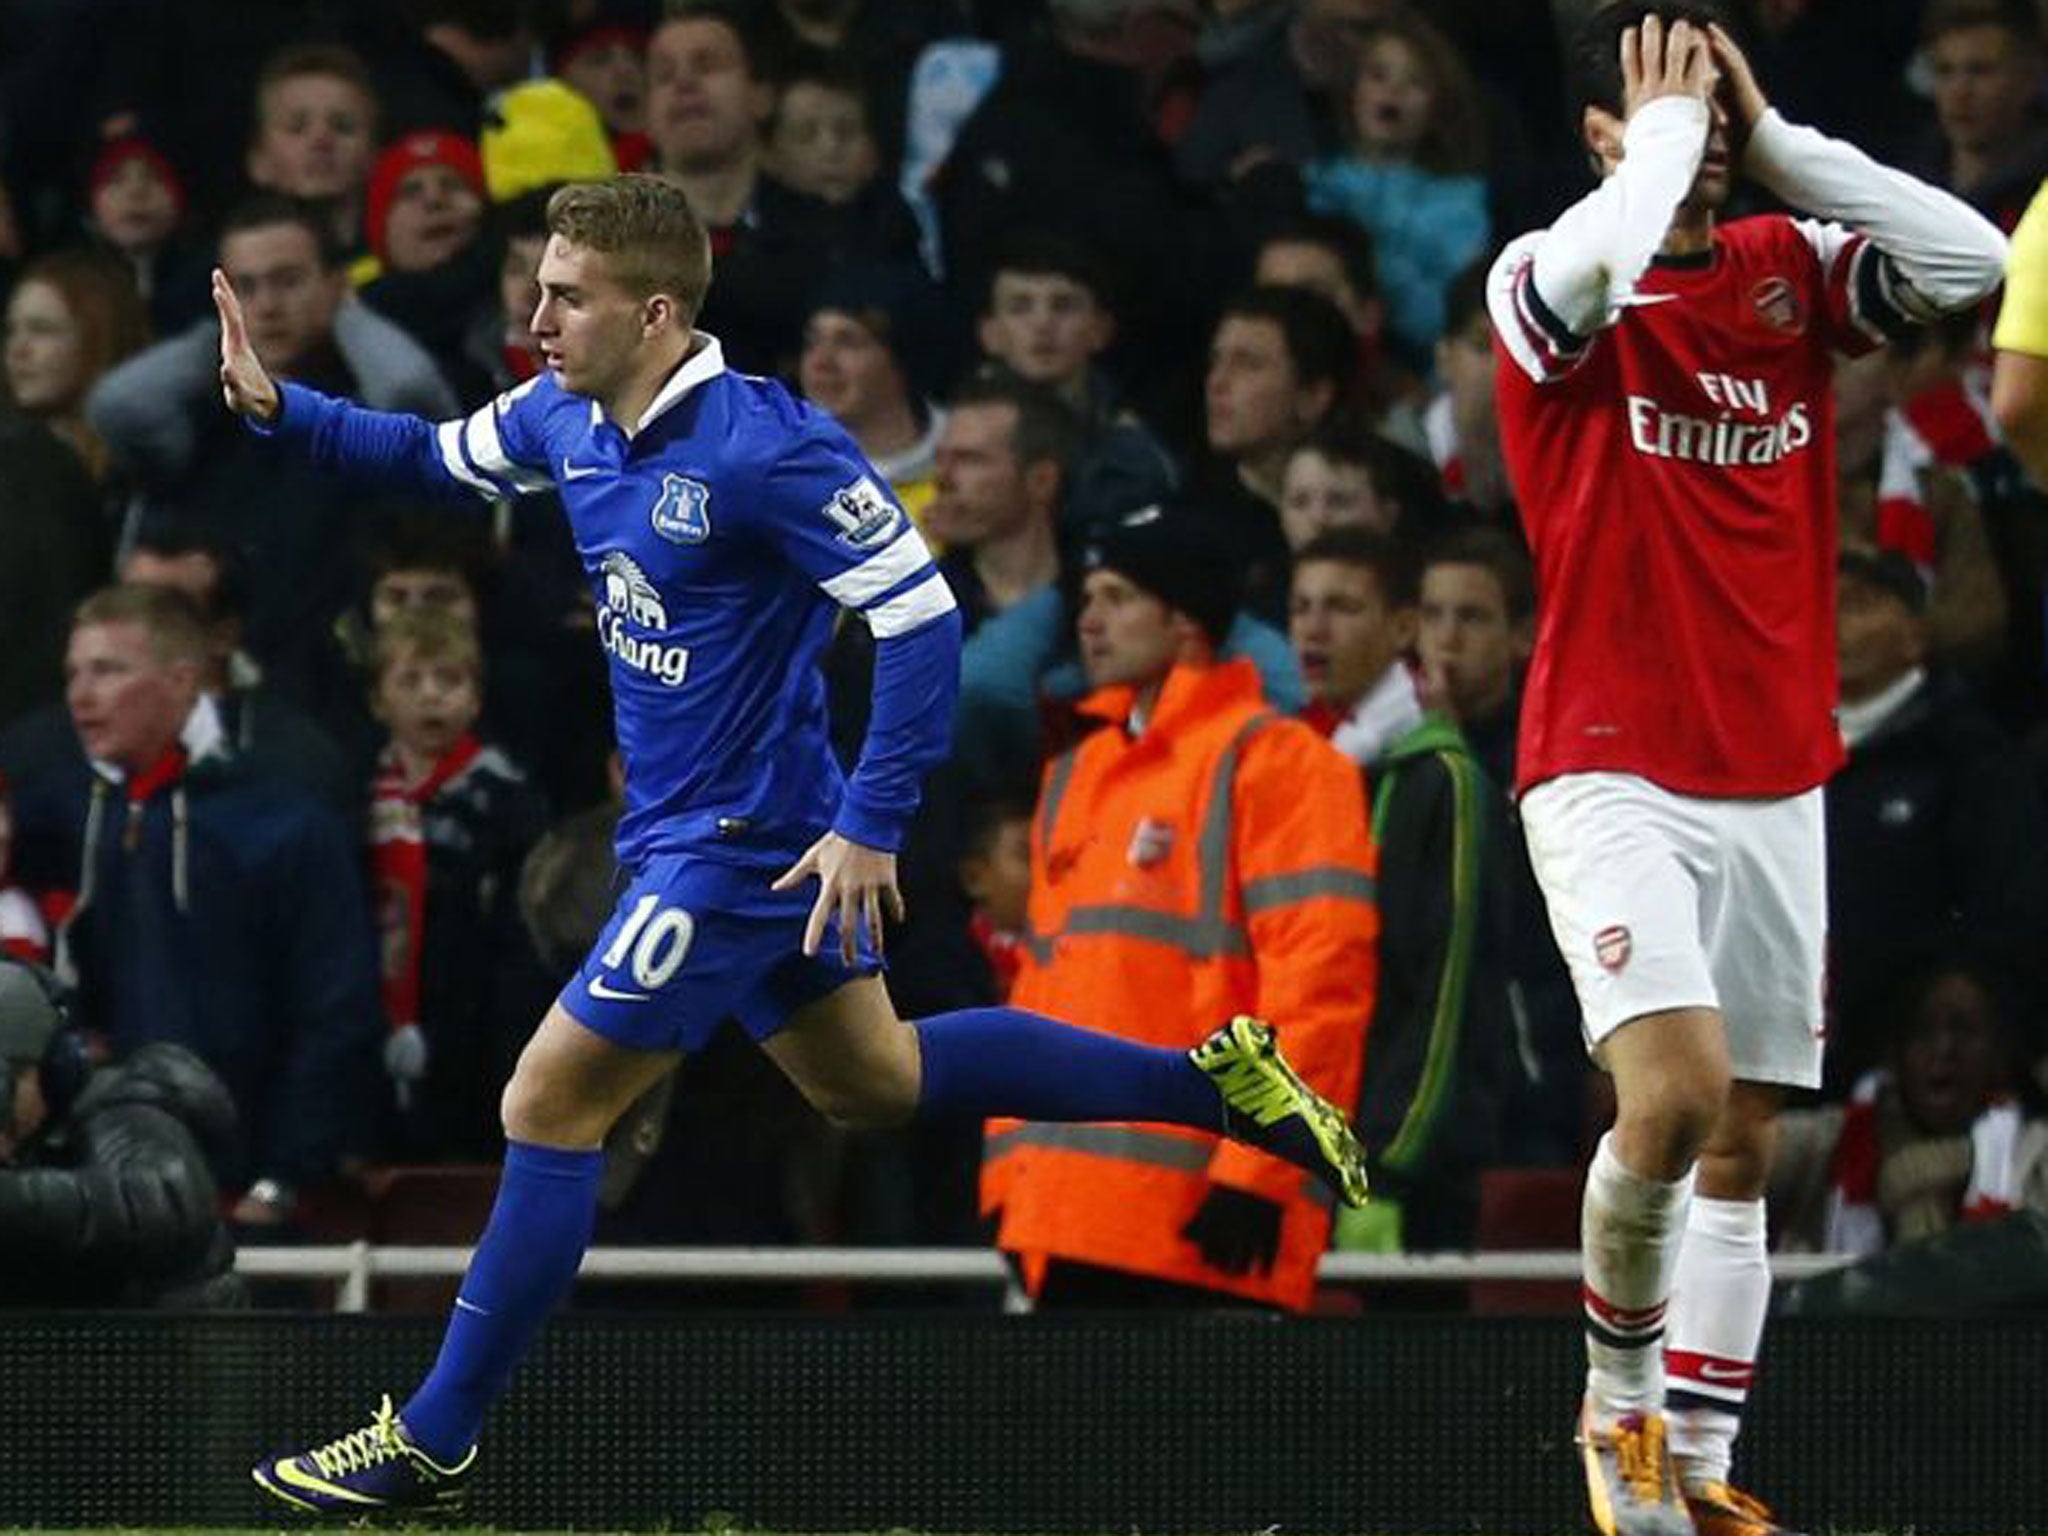 Gerard Deulofeu celebrates his late equaliser, much to the distress of Arsenal's Mikel Arteta